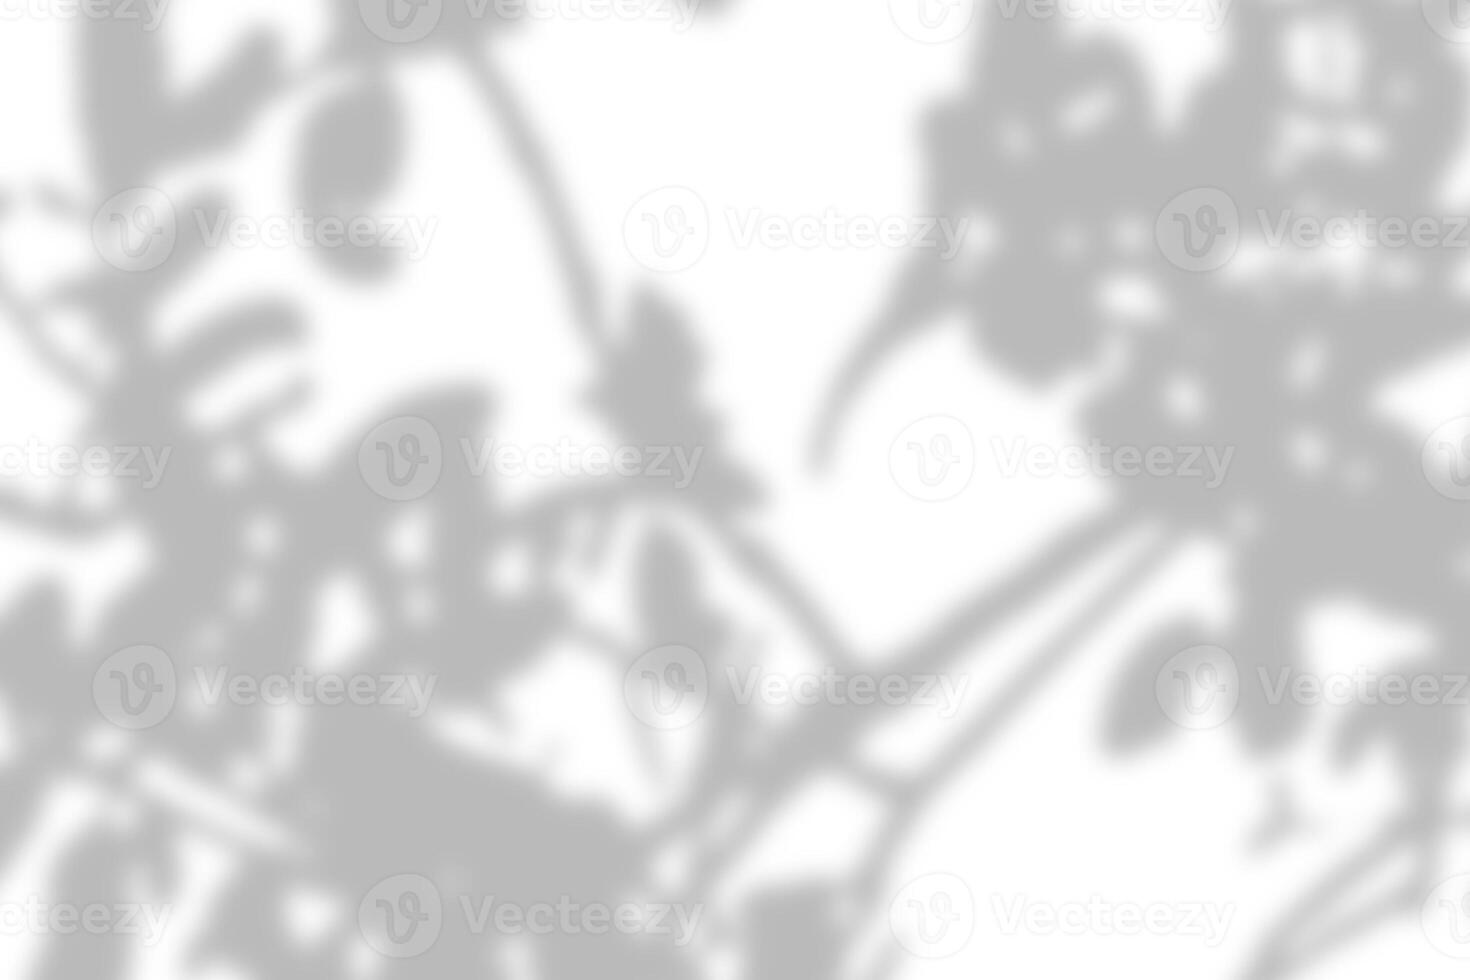 Gray leaves shadow and light blur abstract background on white wall, shadow overlay effect photo